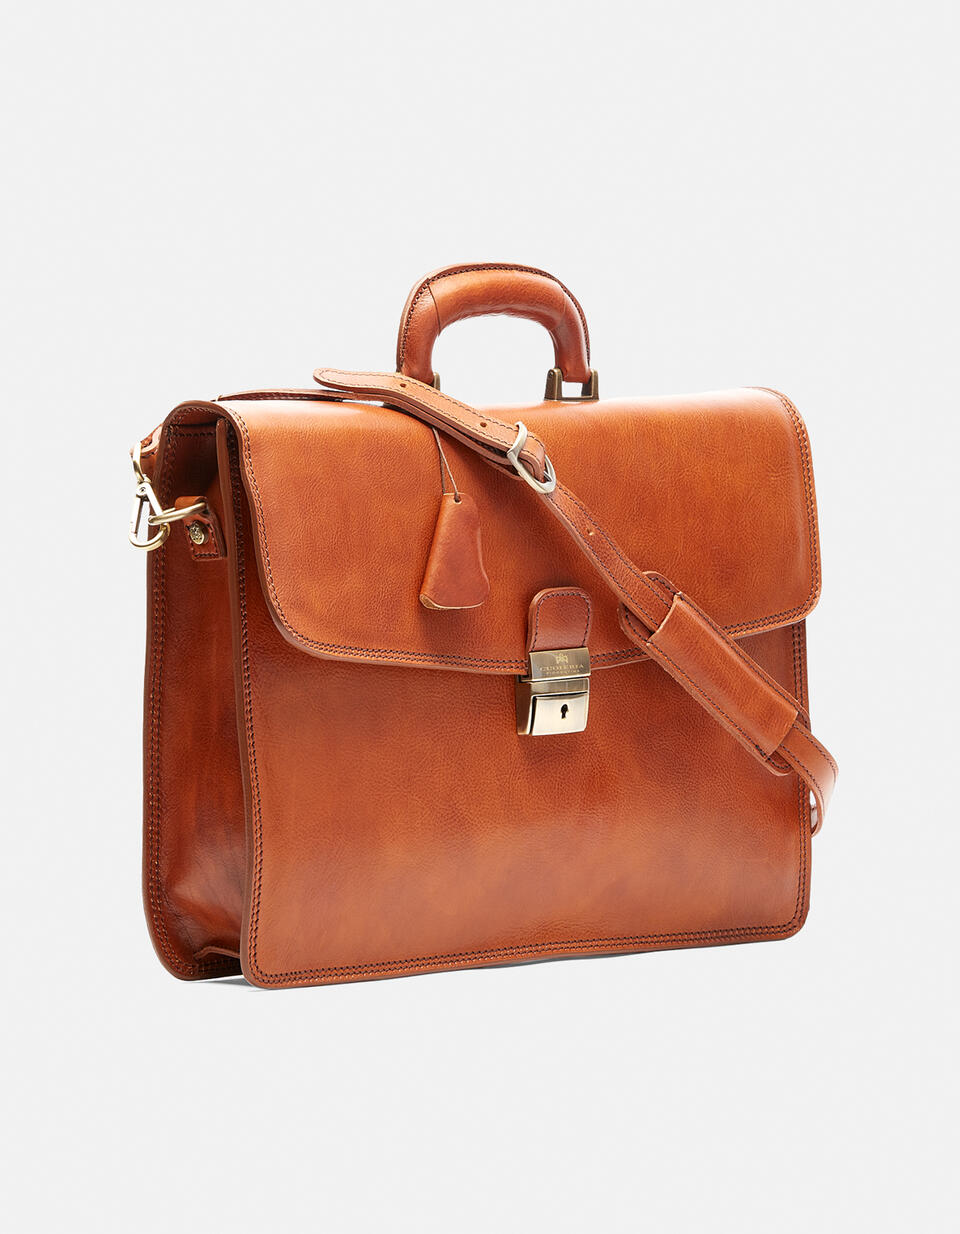 Tanned vegetable leather folder - Briefcases and Laptop Bags | Briefcases COGNAC - Briefcases and Laptop Bags | BriefcasesCuoieria Fiorentina